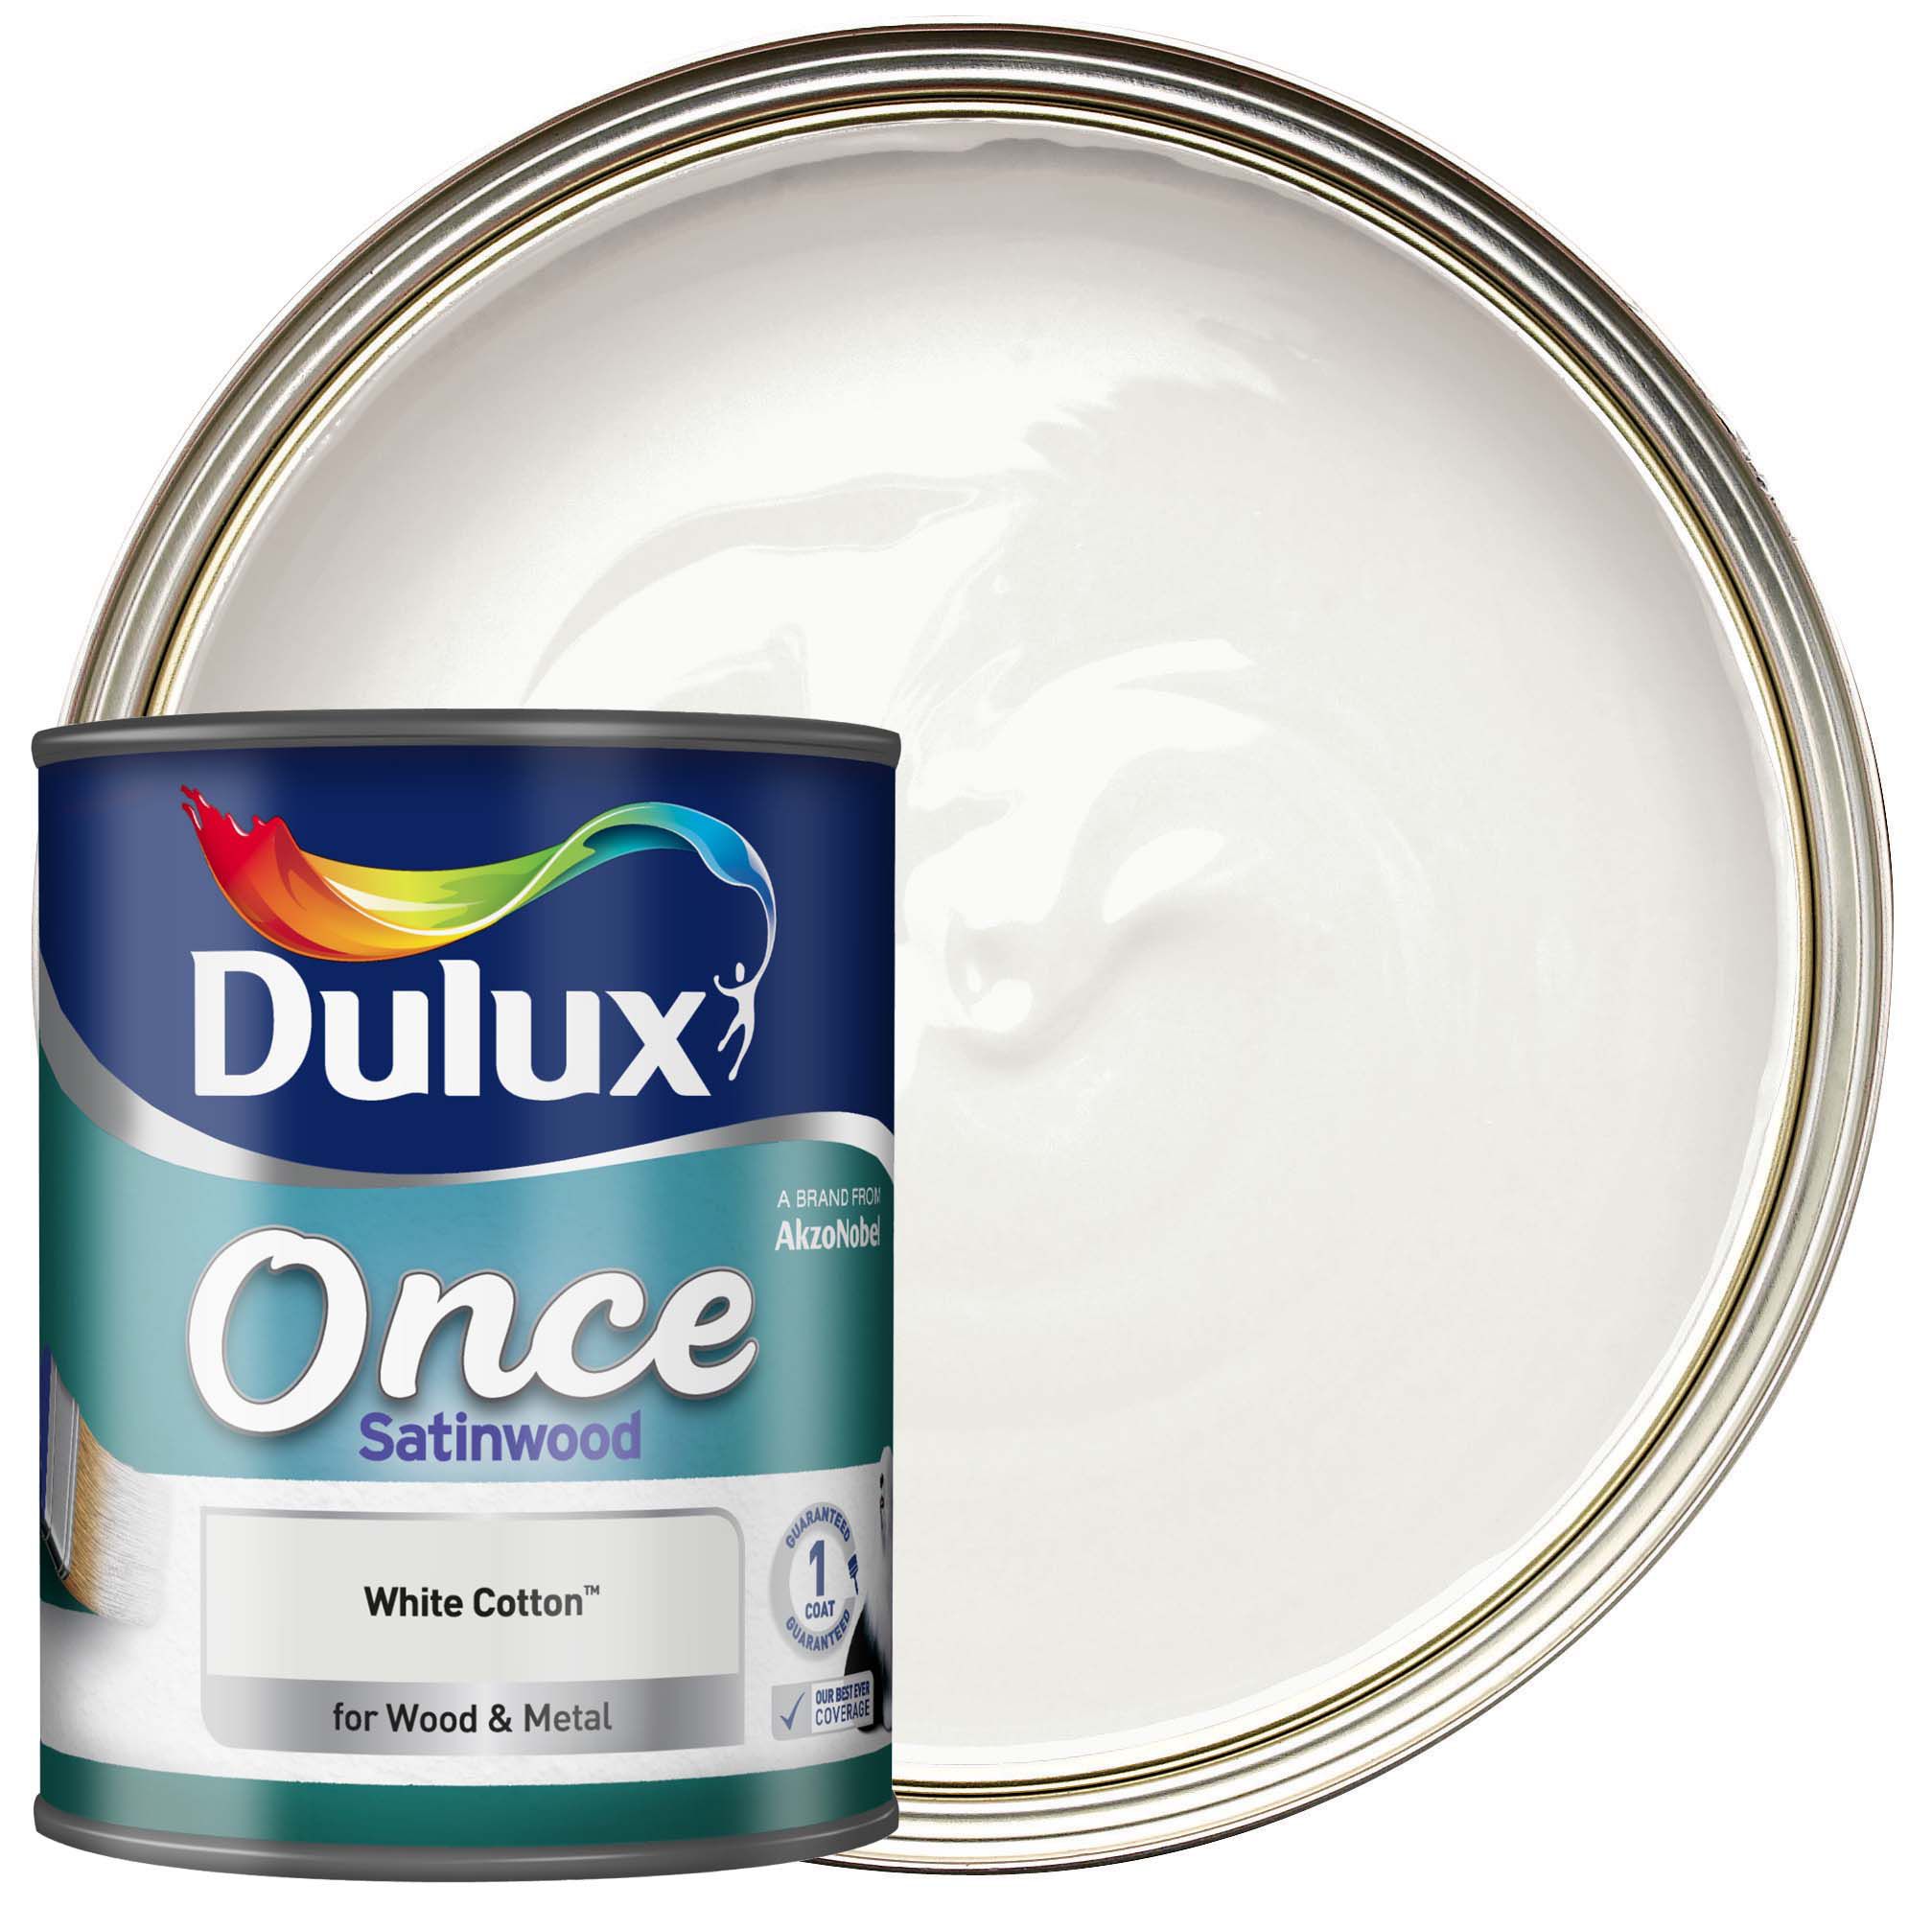 Dulux Once Satinwood Paint - White Cotton - 750ml